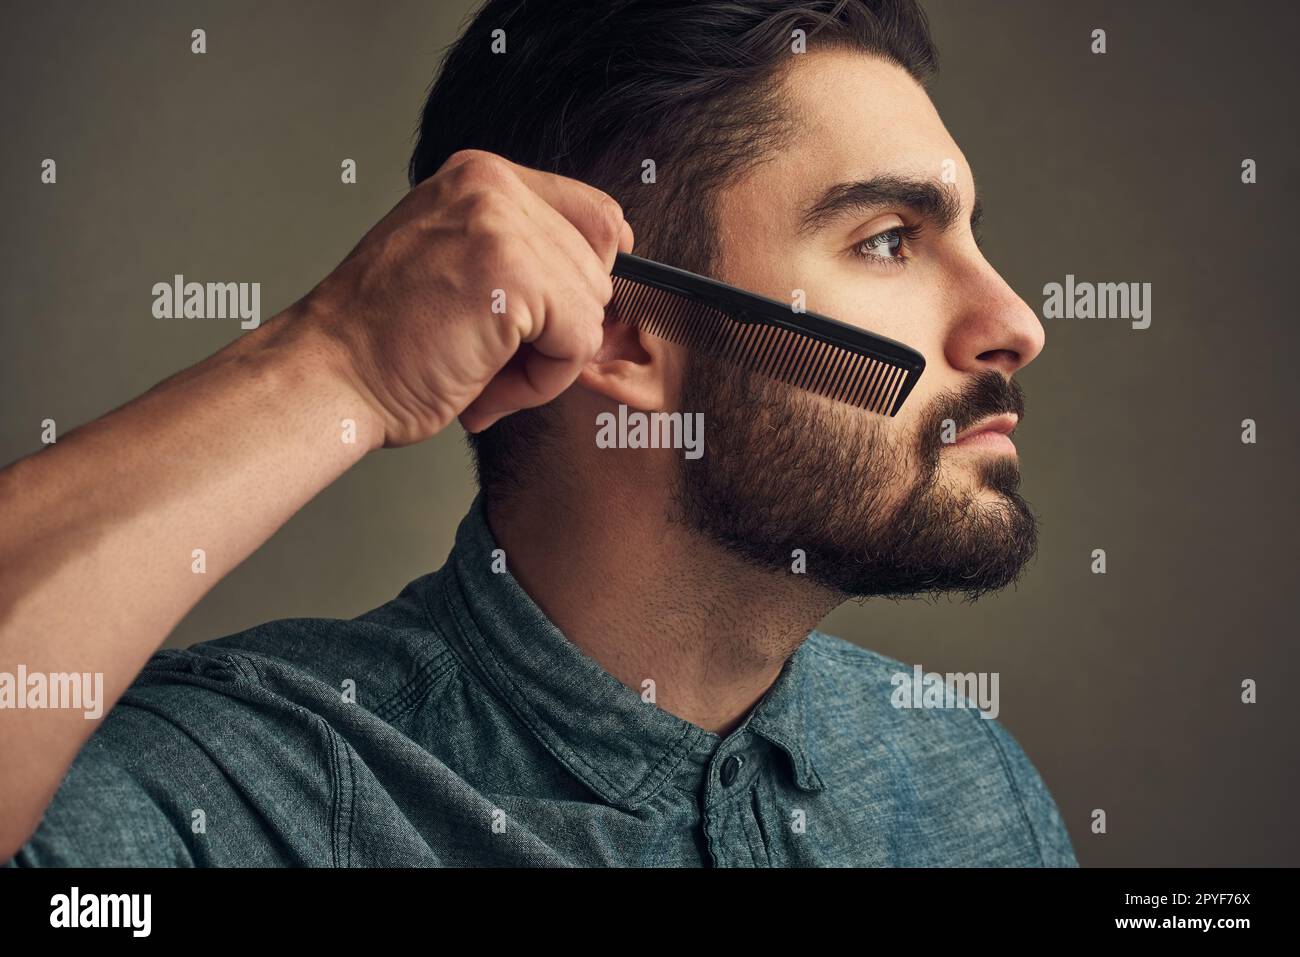 Facial hair needs your attention. a handsome young man combing his beard against a grey background. Stock Photo